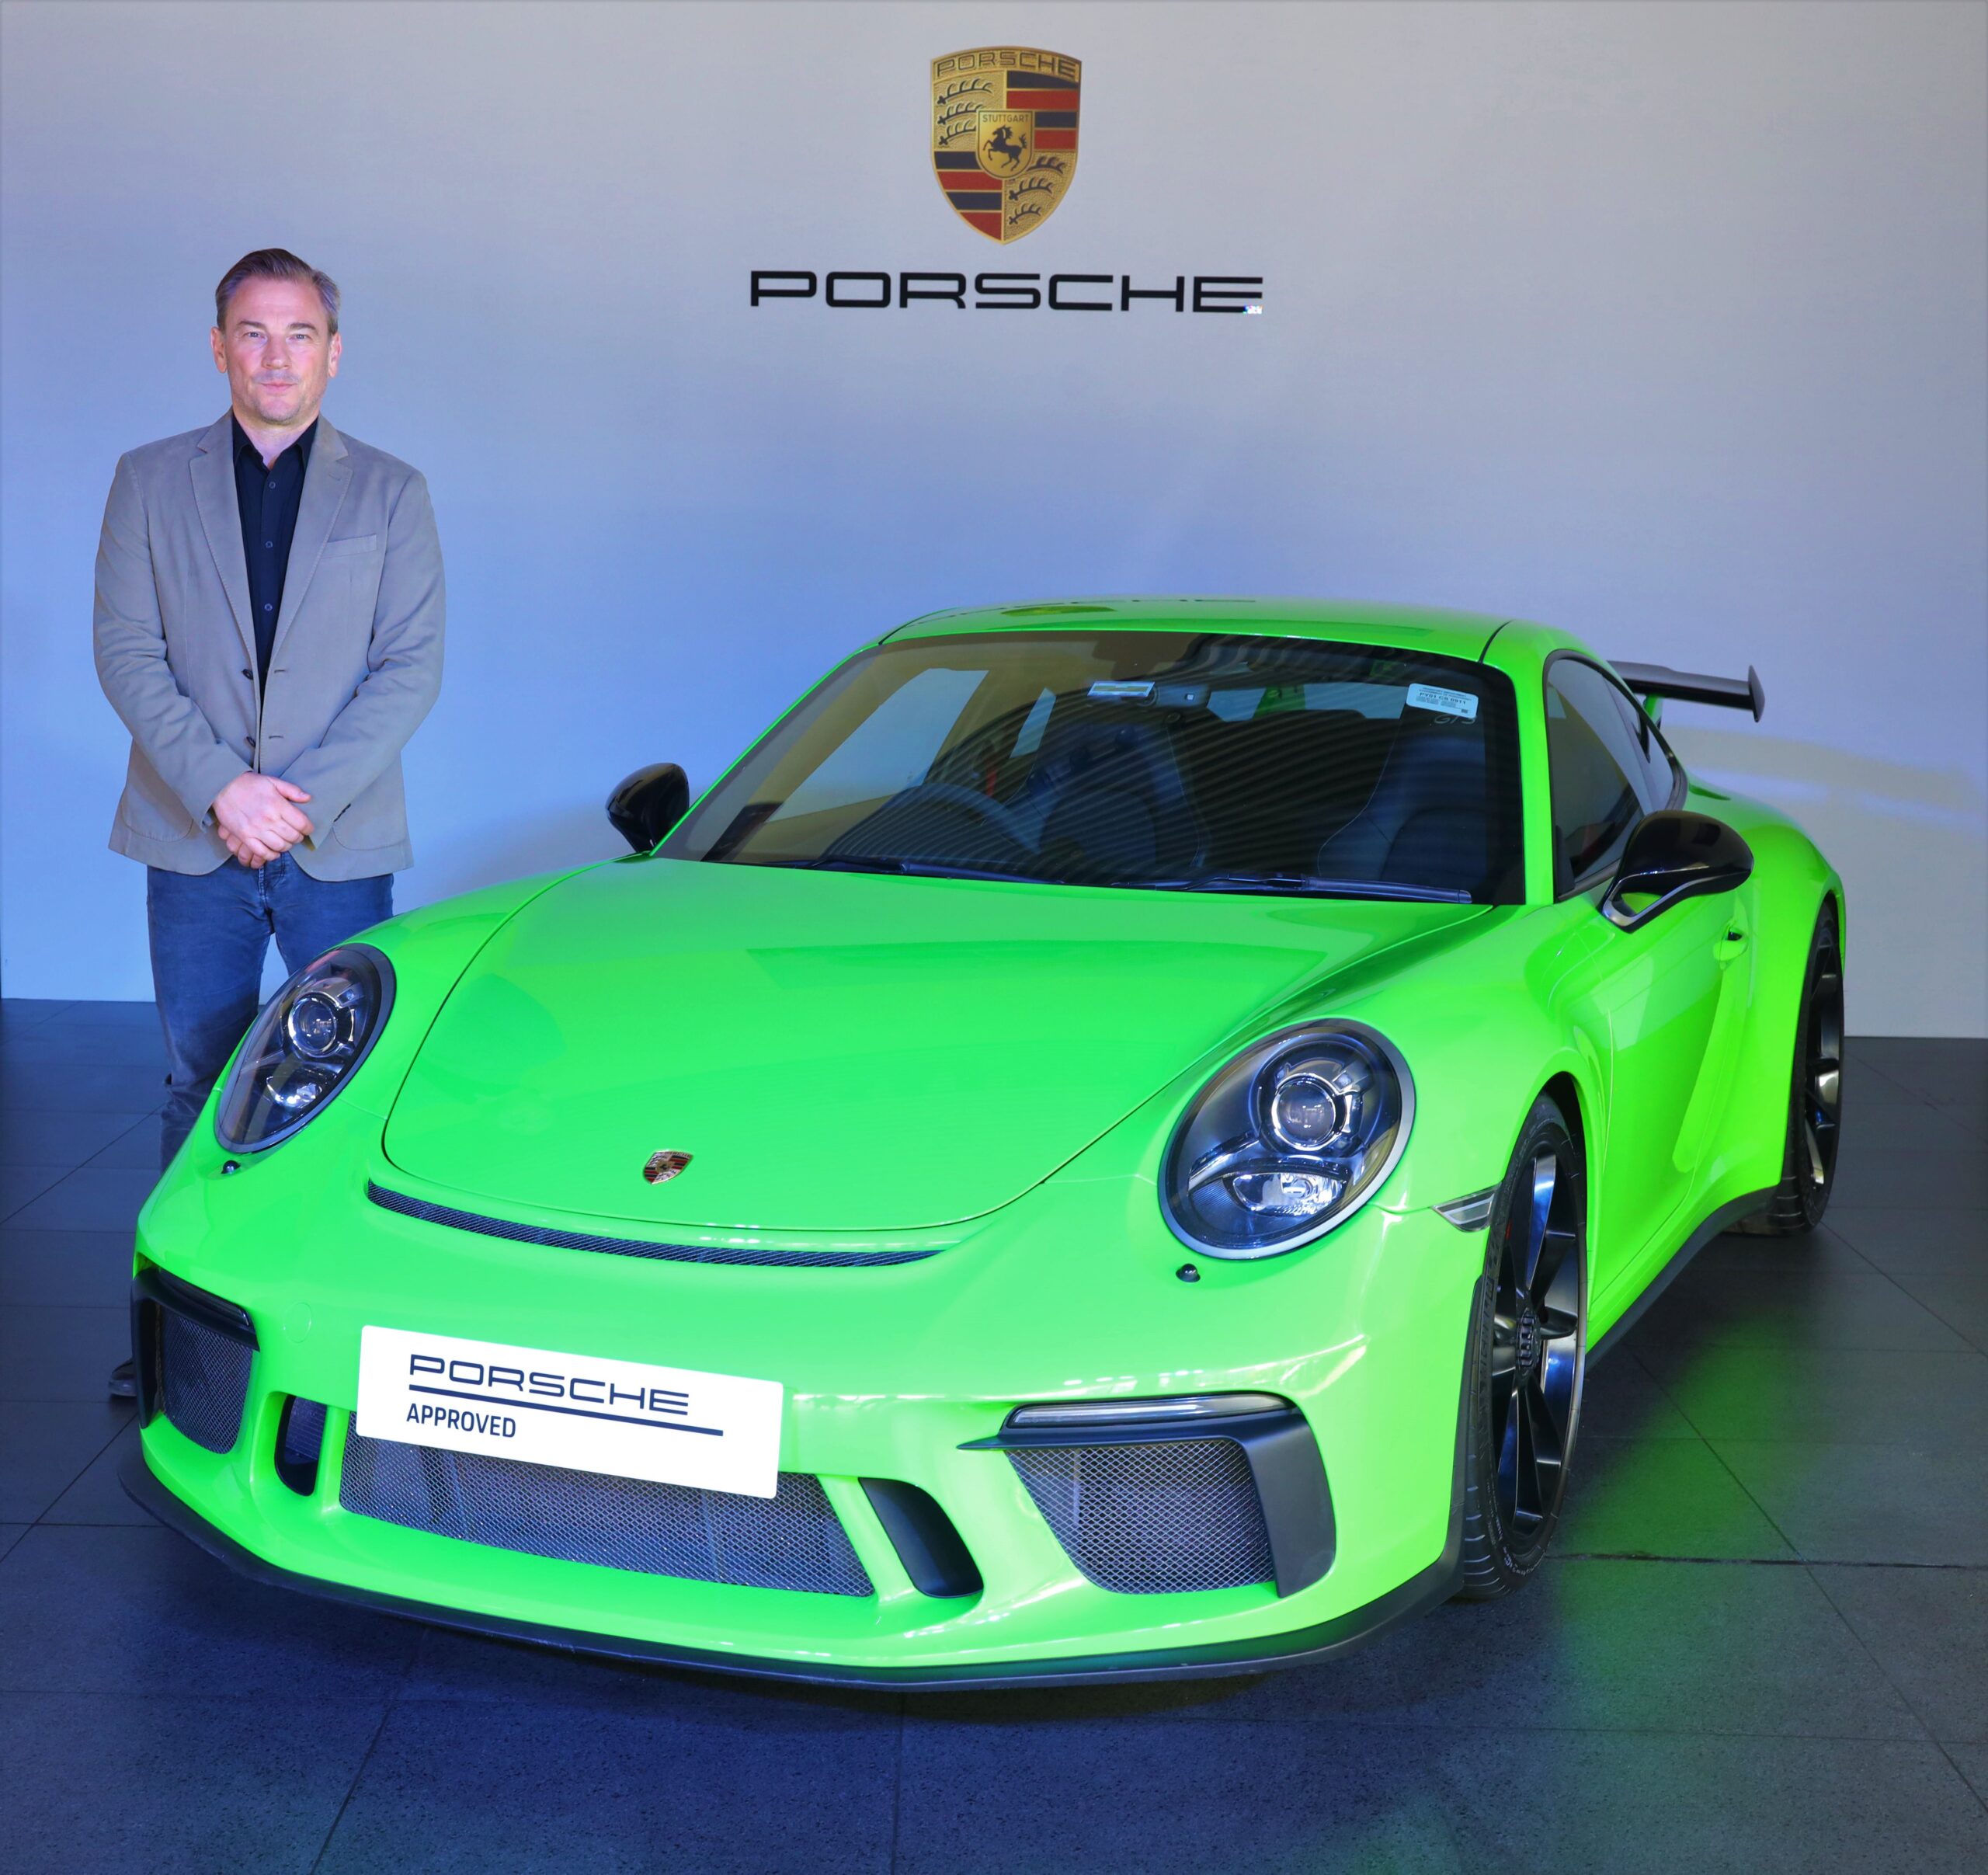 Porsche Approved Programme Now In India